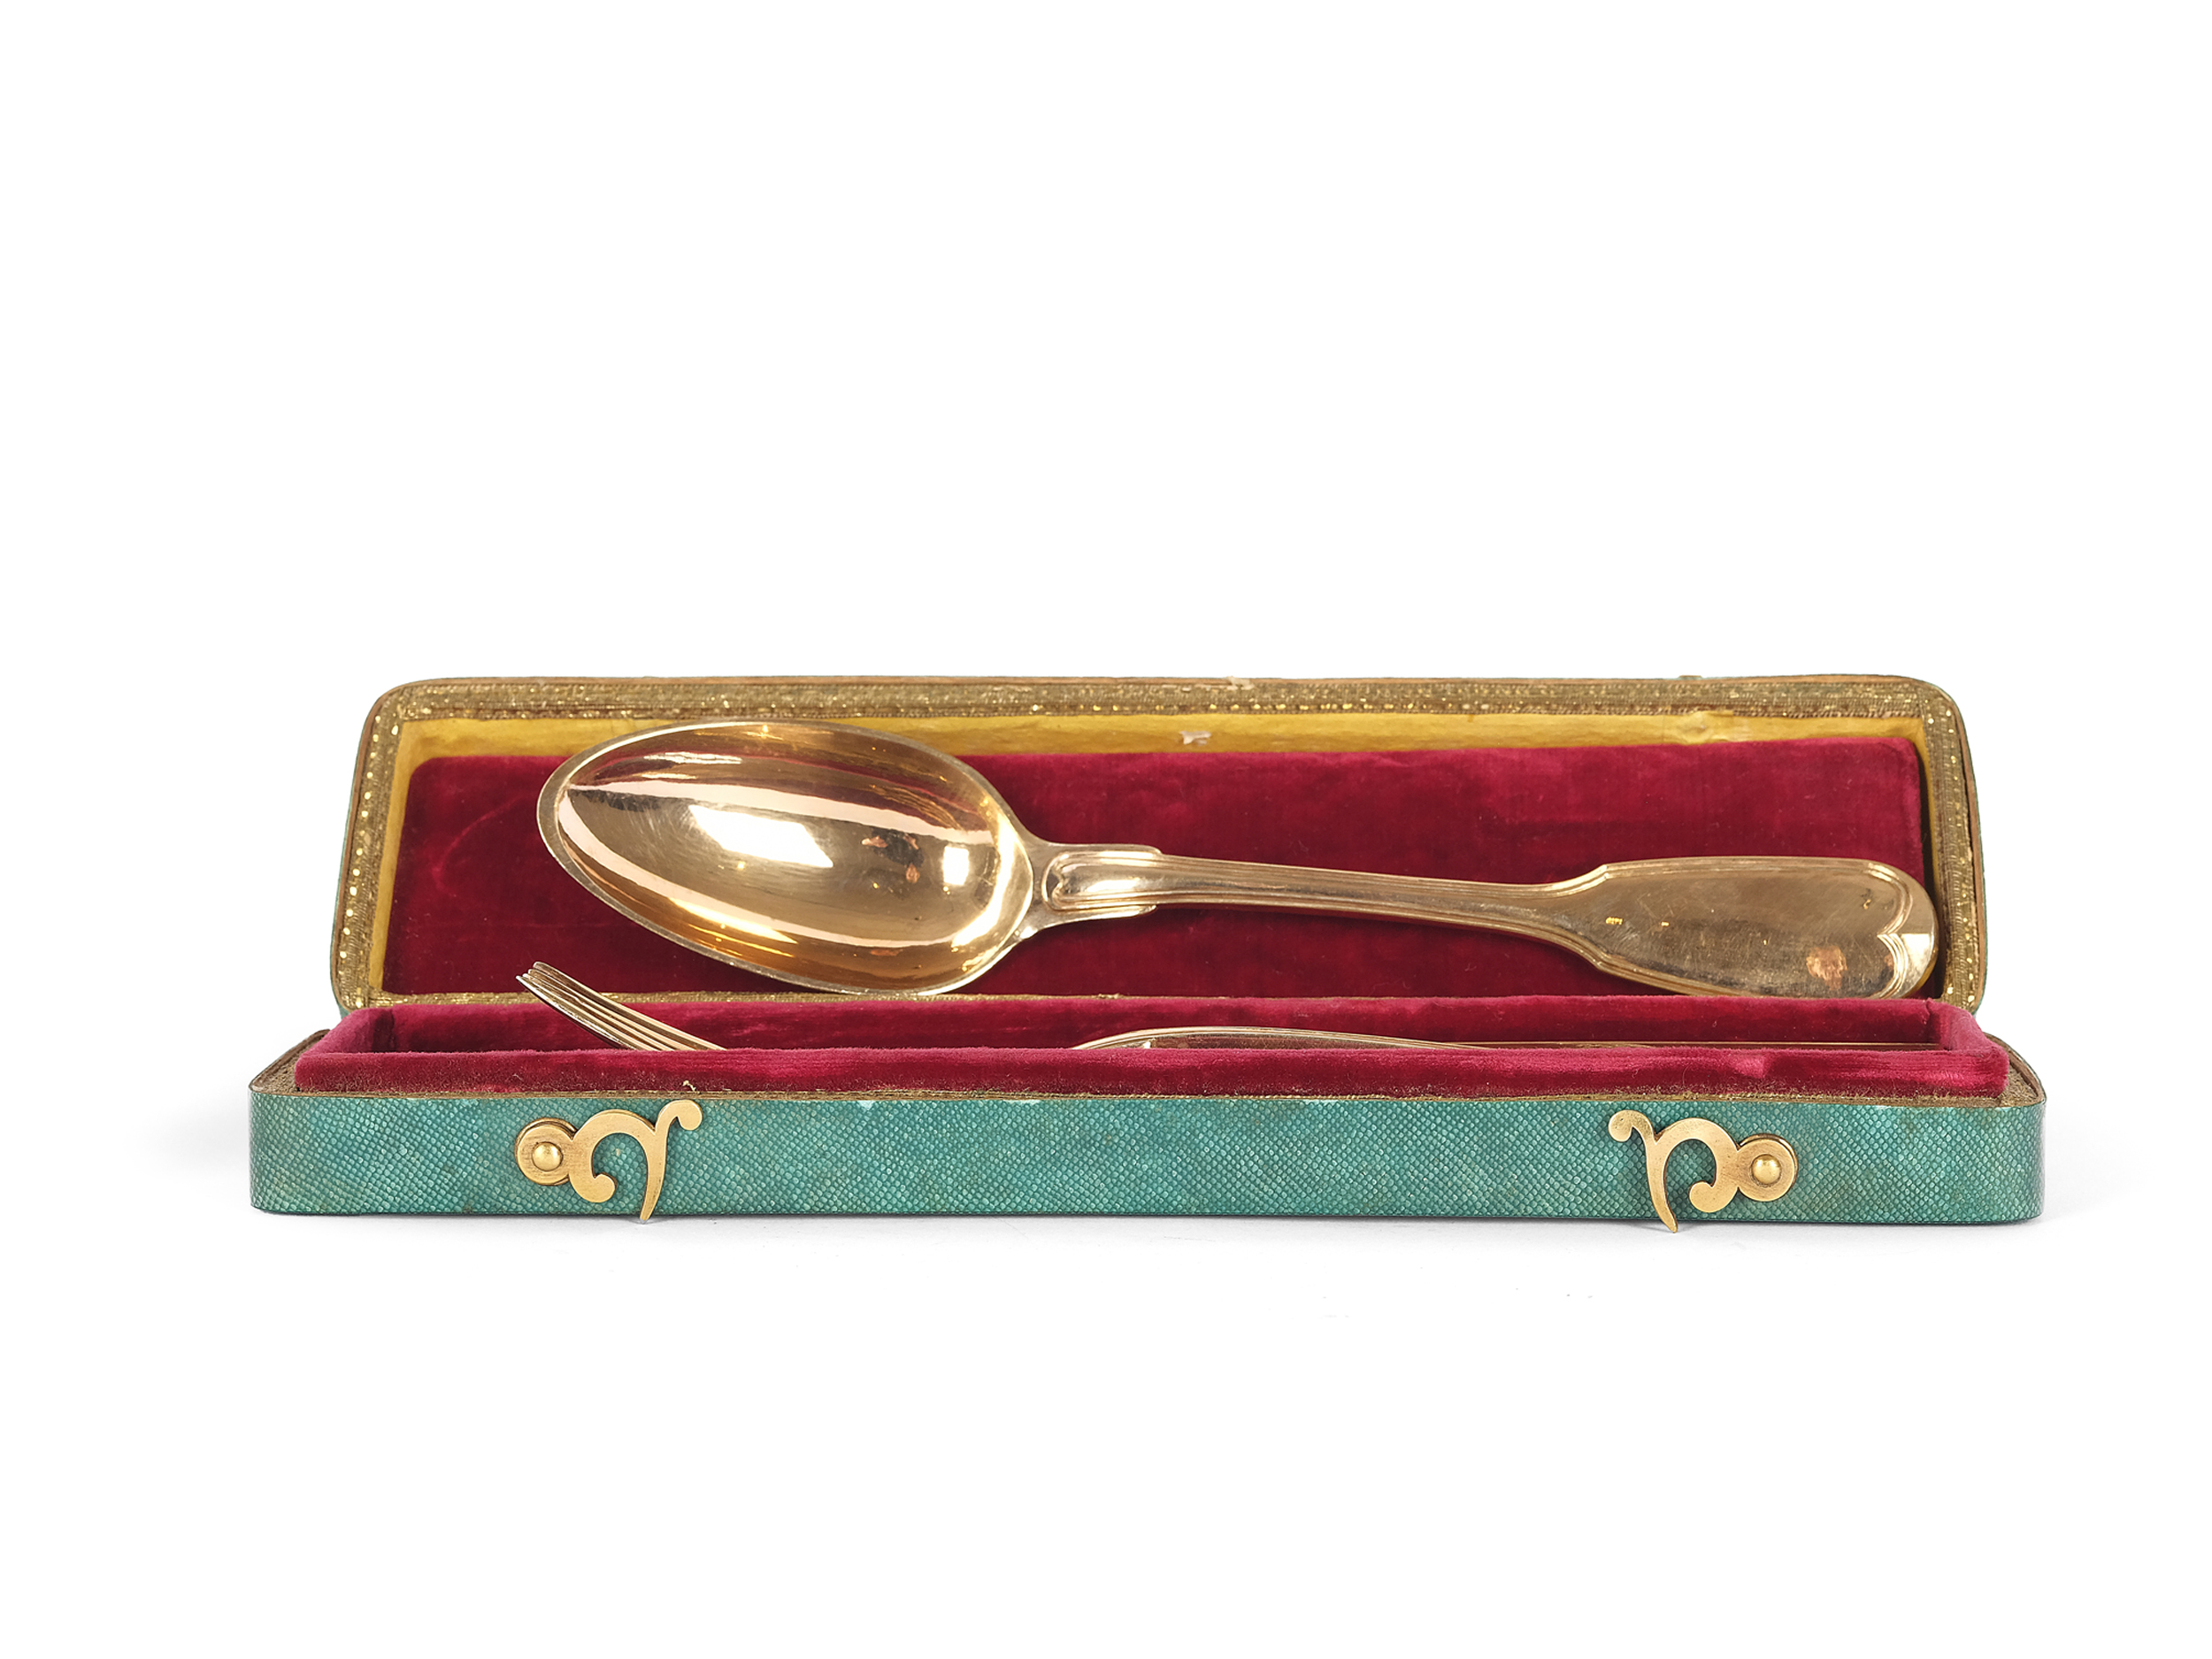 Travelling cutlery in a case, France, late 18th century - Image 2 of 5